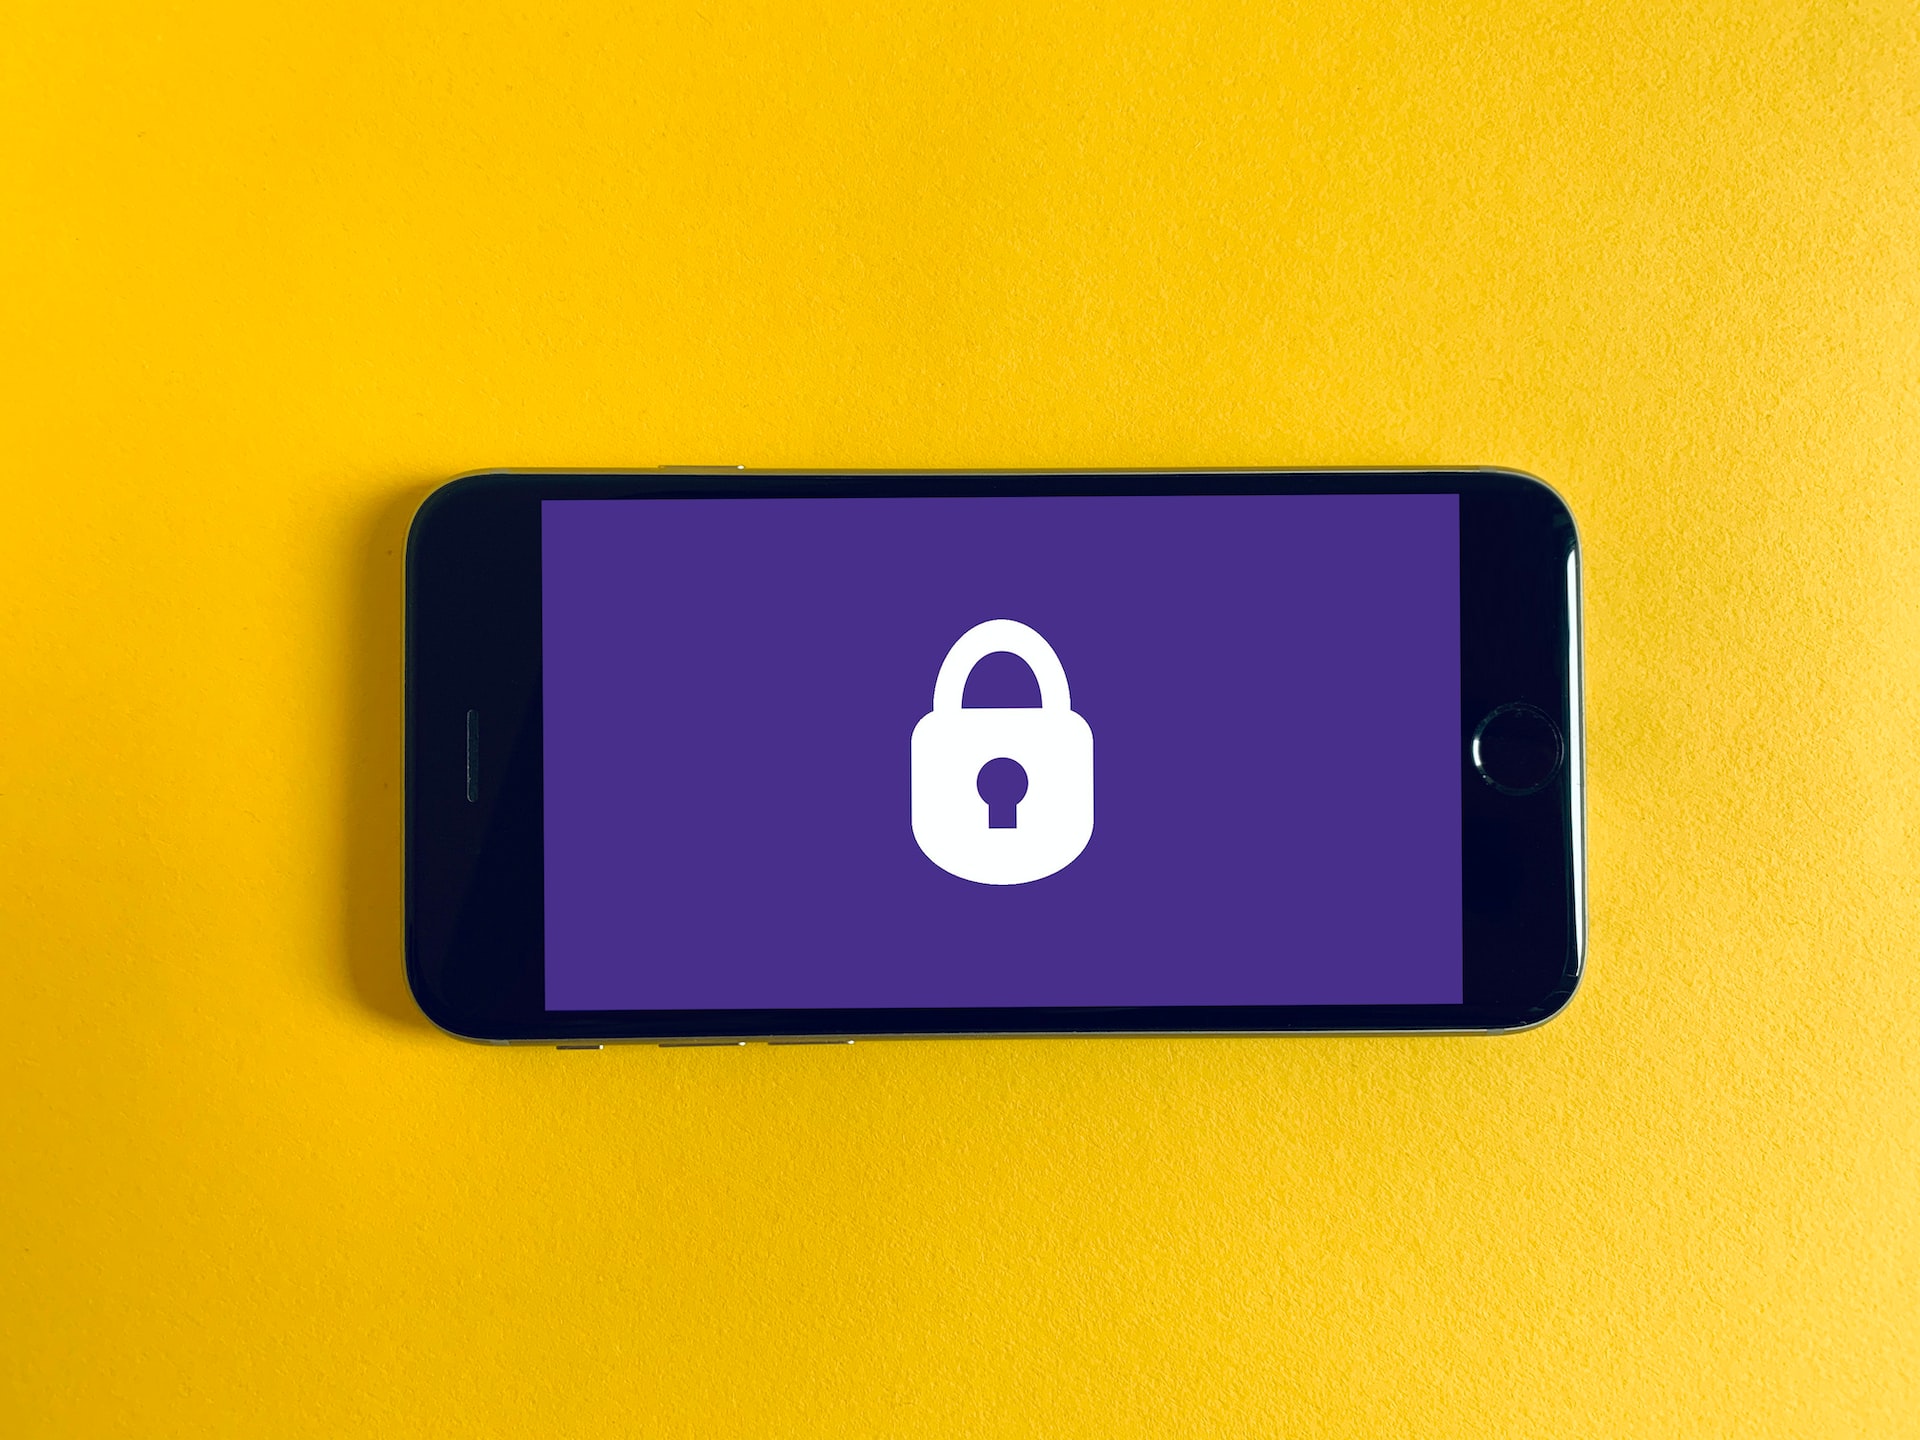 smartphone screen with a padlock icon